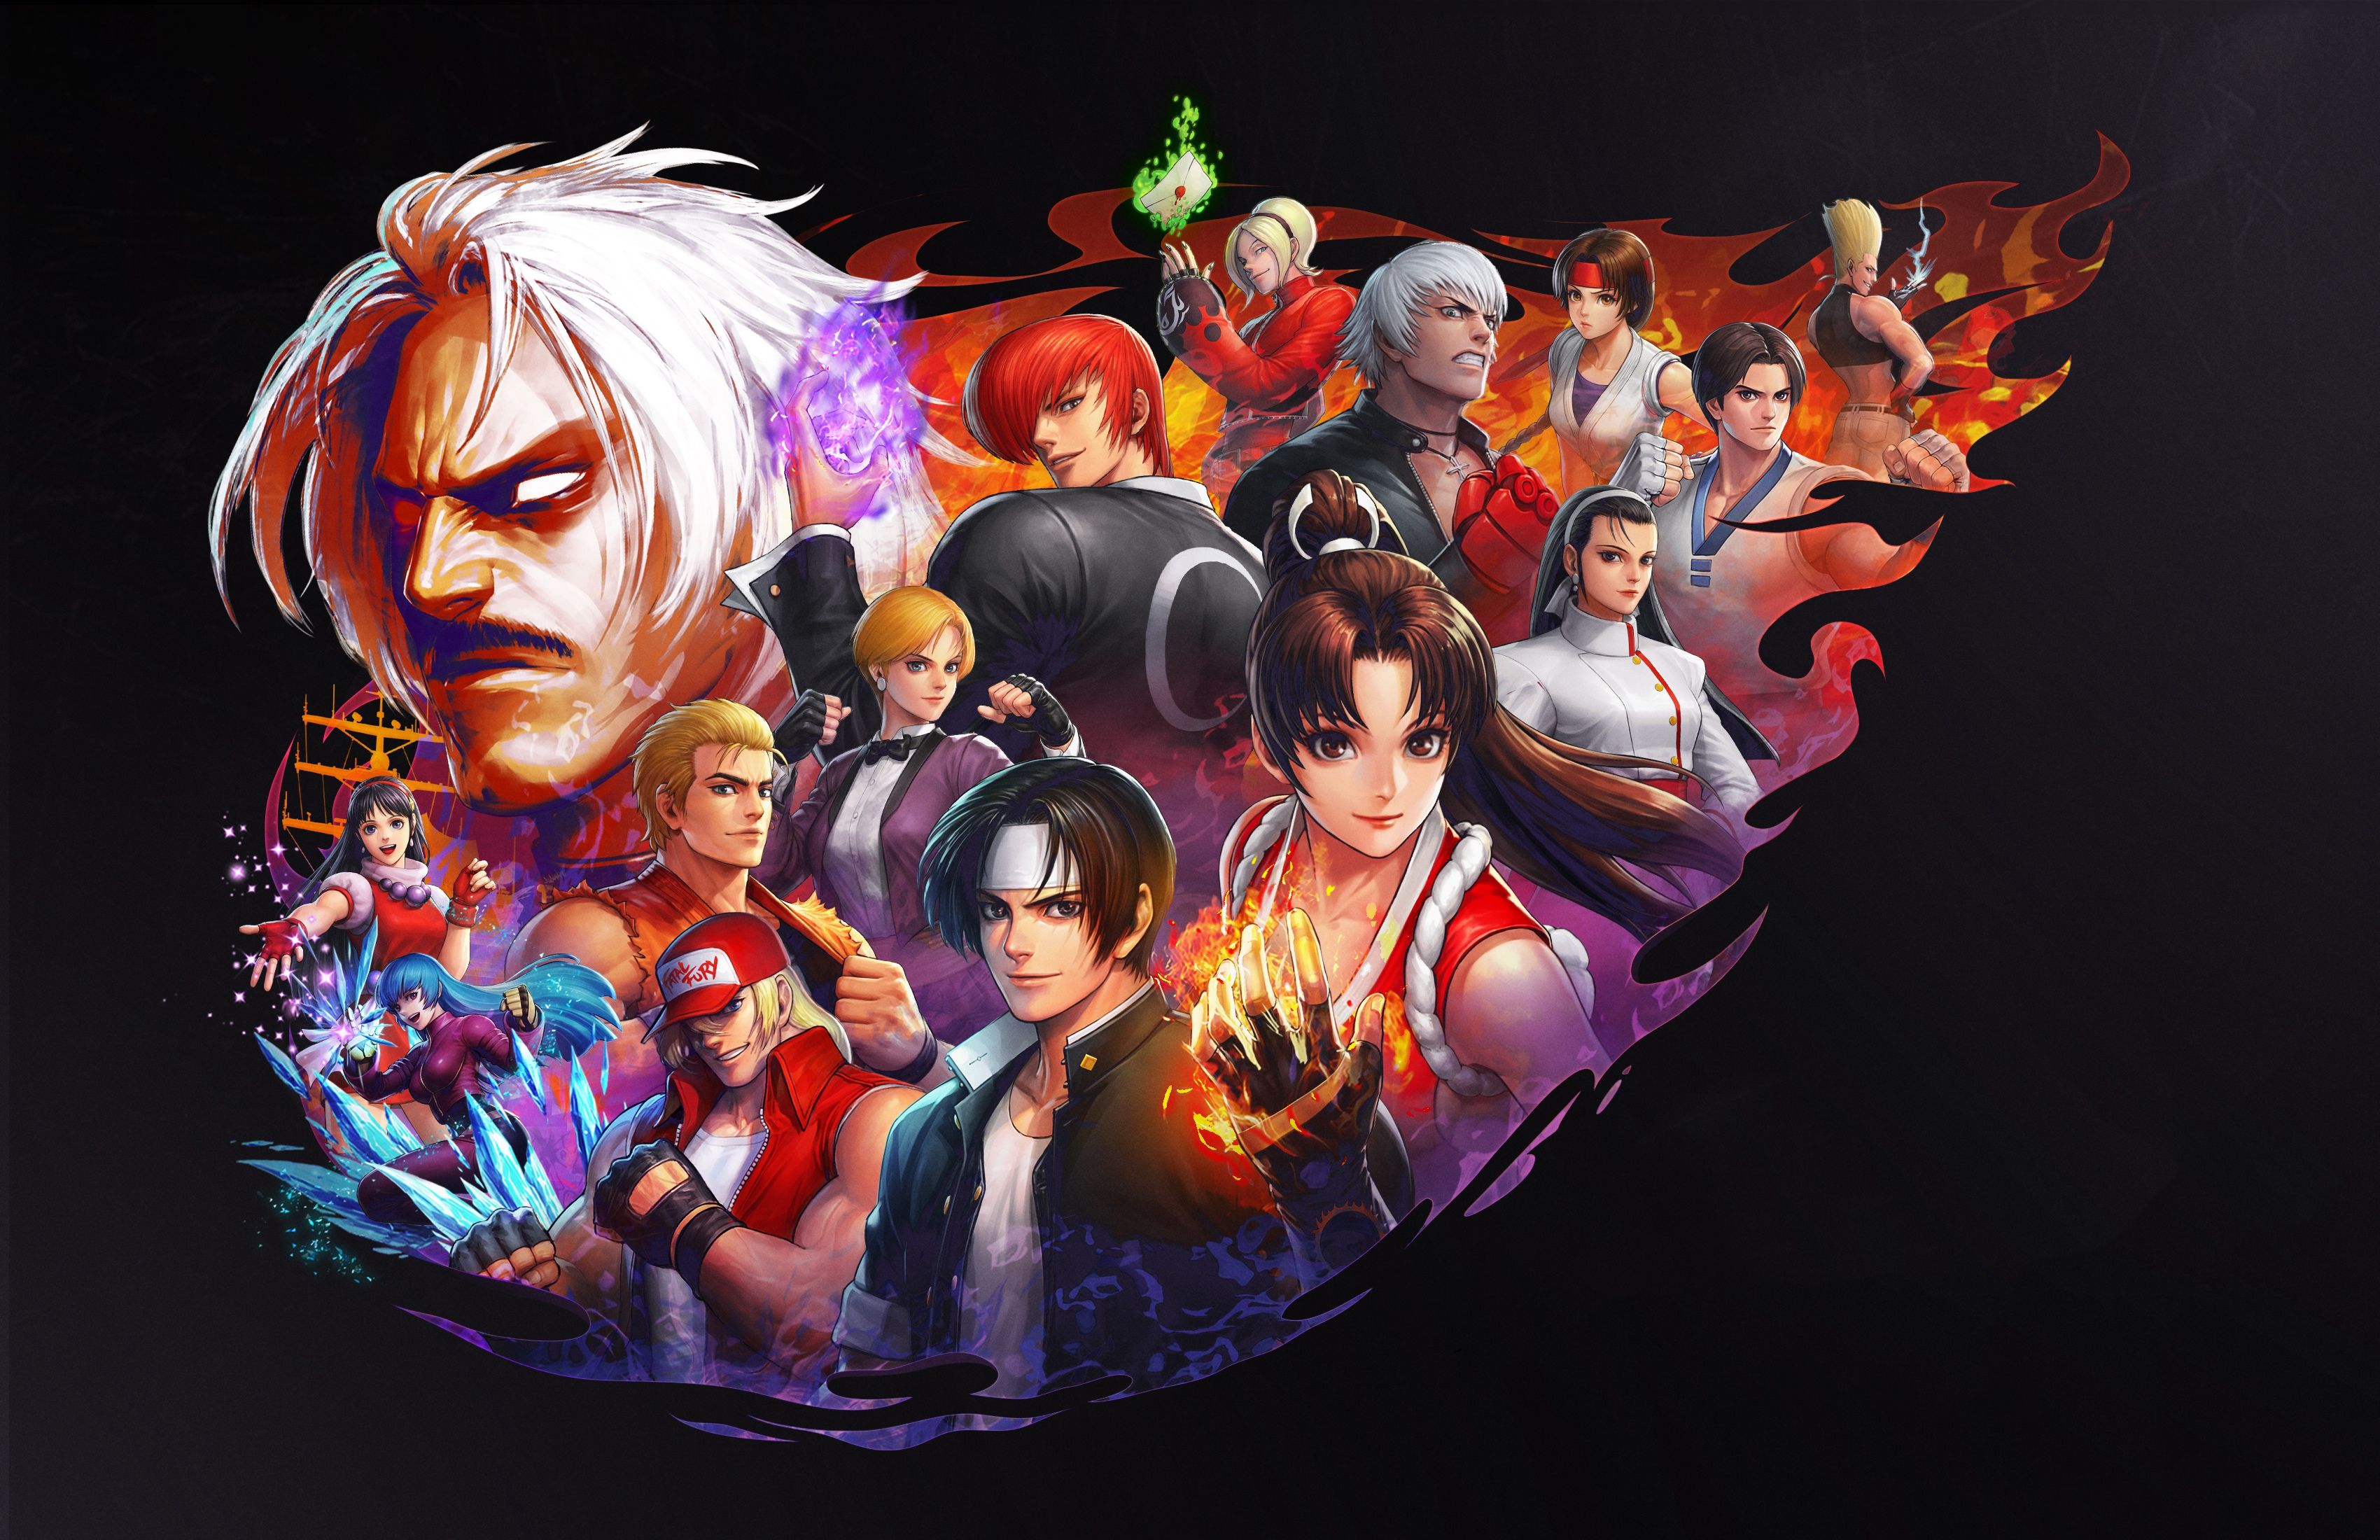 King of Fighters XIII Wallpaper